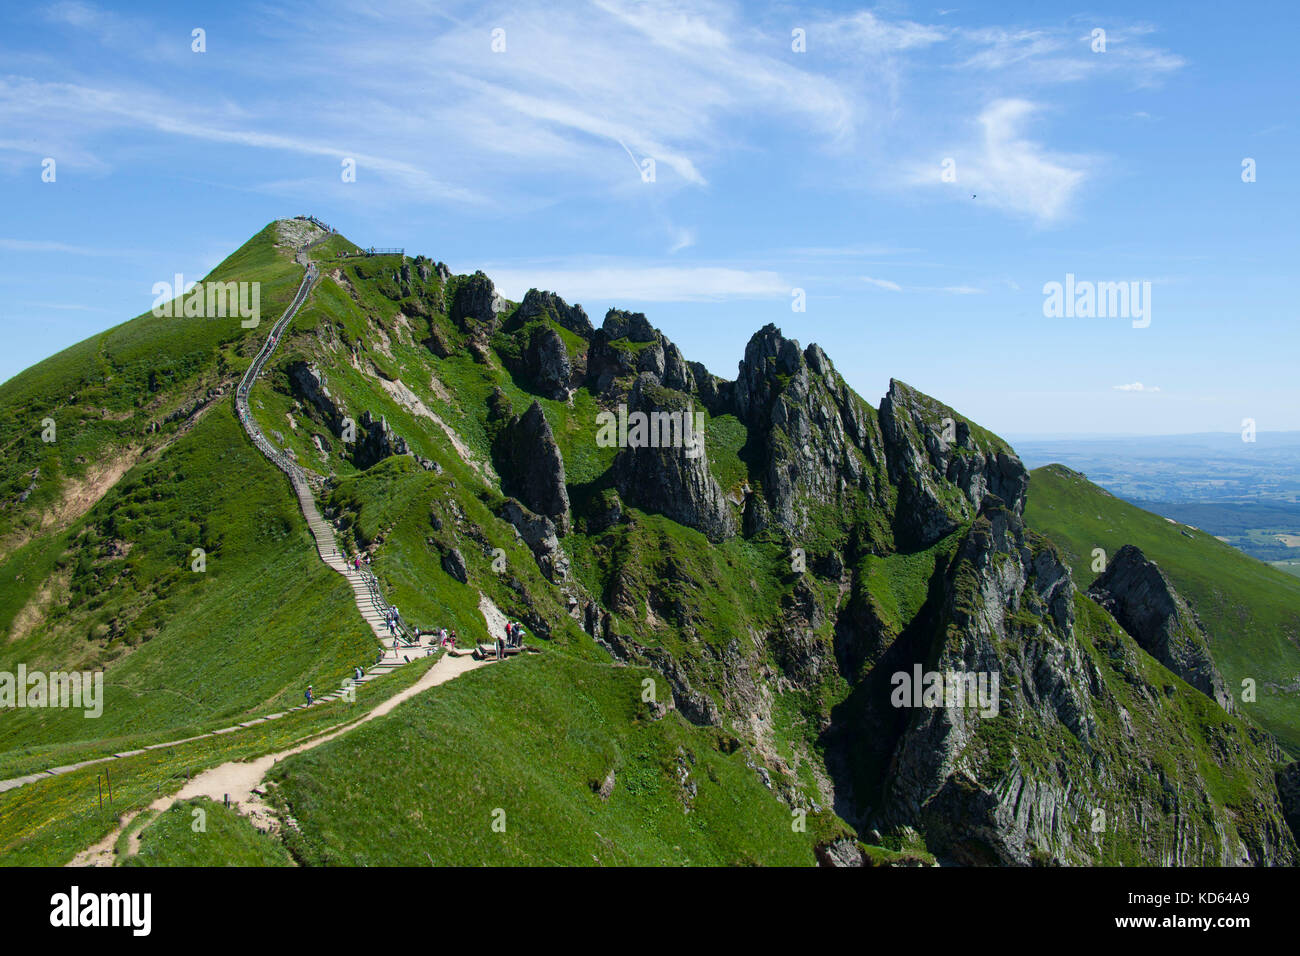 The Puy de Sancy mountain, volcano of the Monts Dore massif, the highest mountain in the Massif Central region, at an elevation of 1886 m. Peak 'Les a Stock Photo